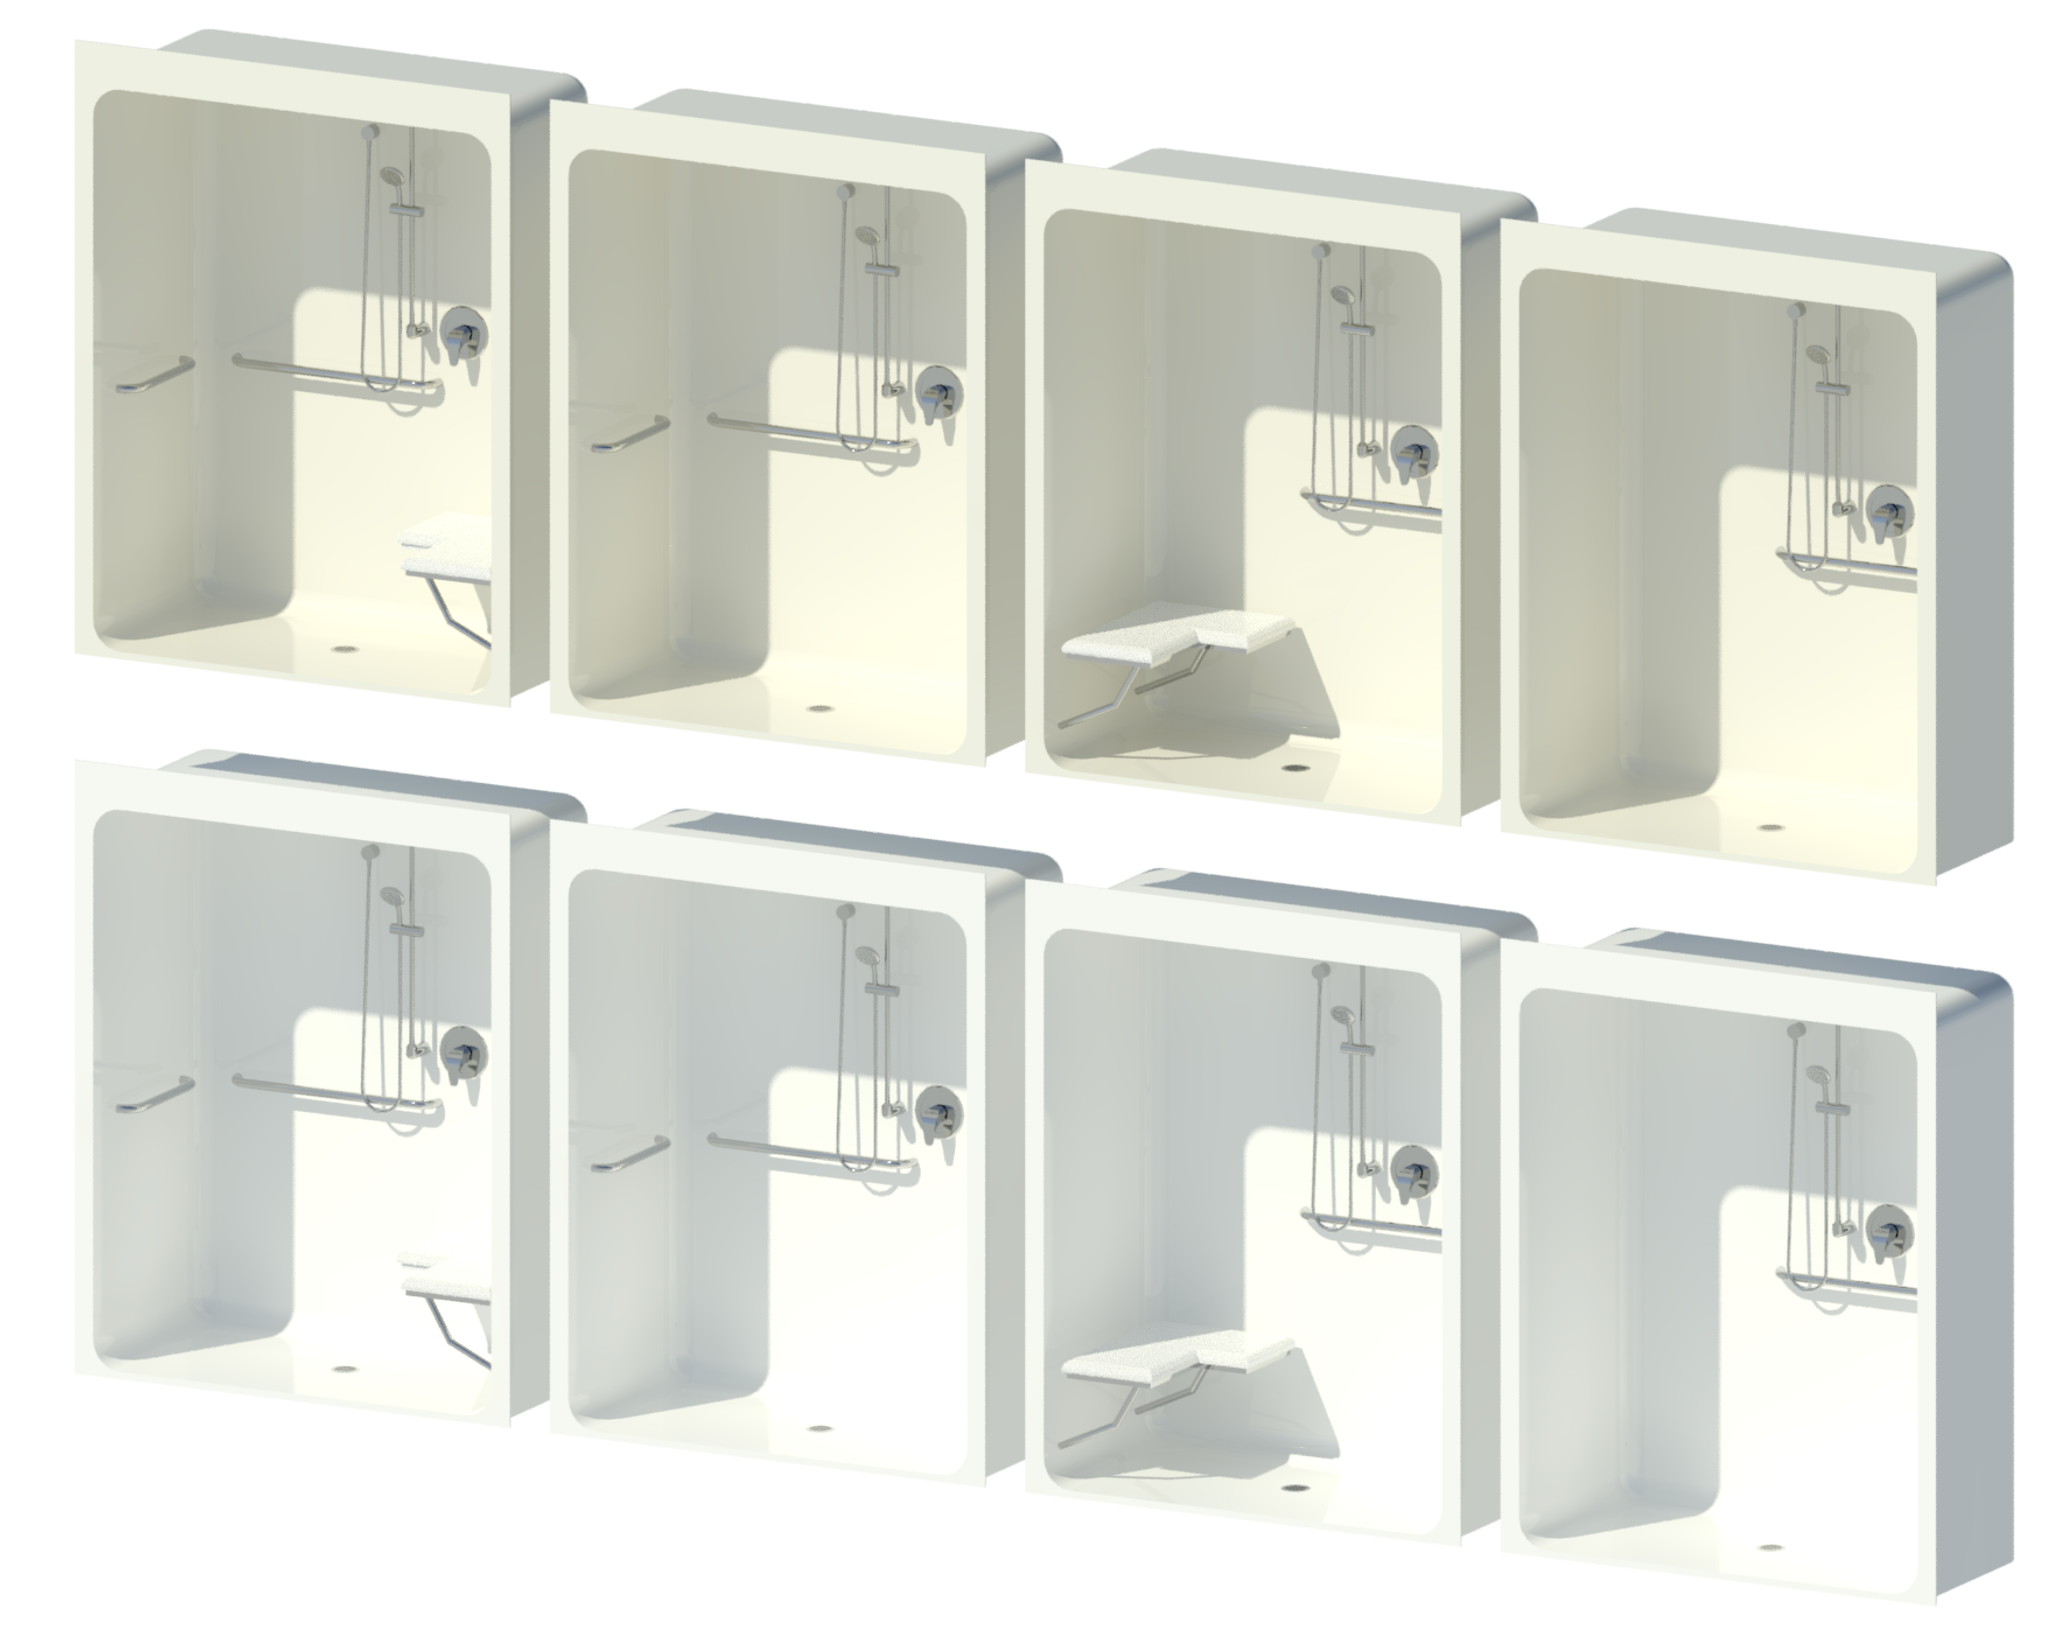 Render of an ADA-compliant Aquatic Bath Revit family showing various types within the family.